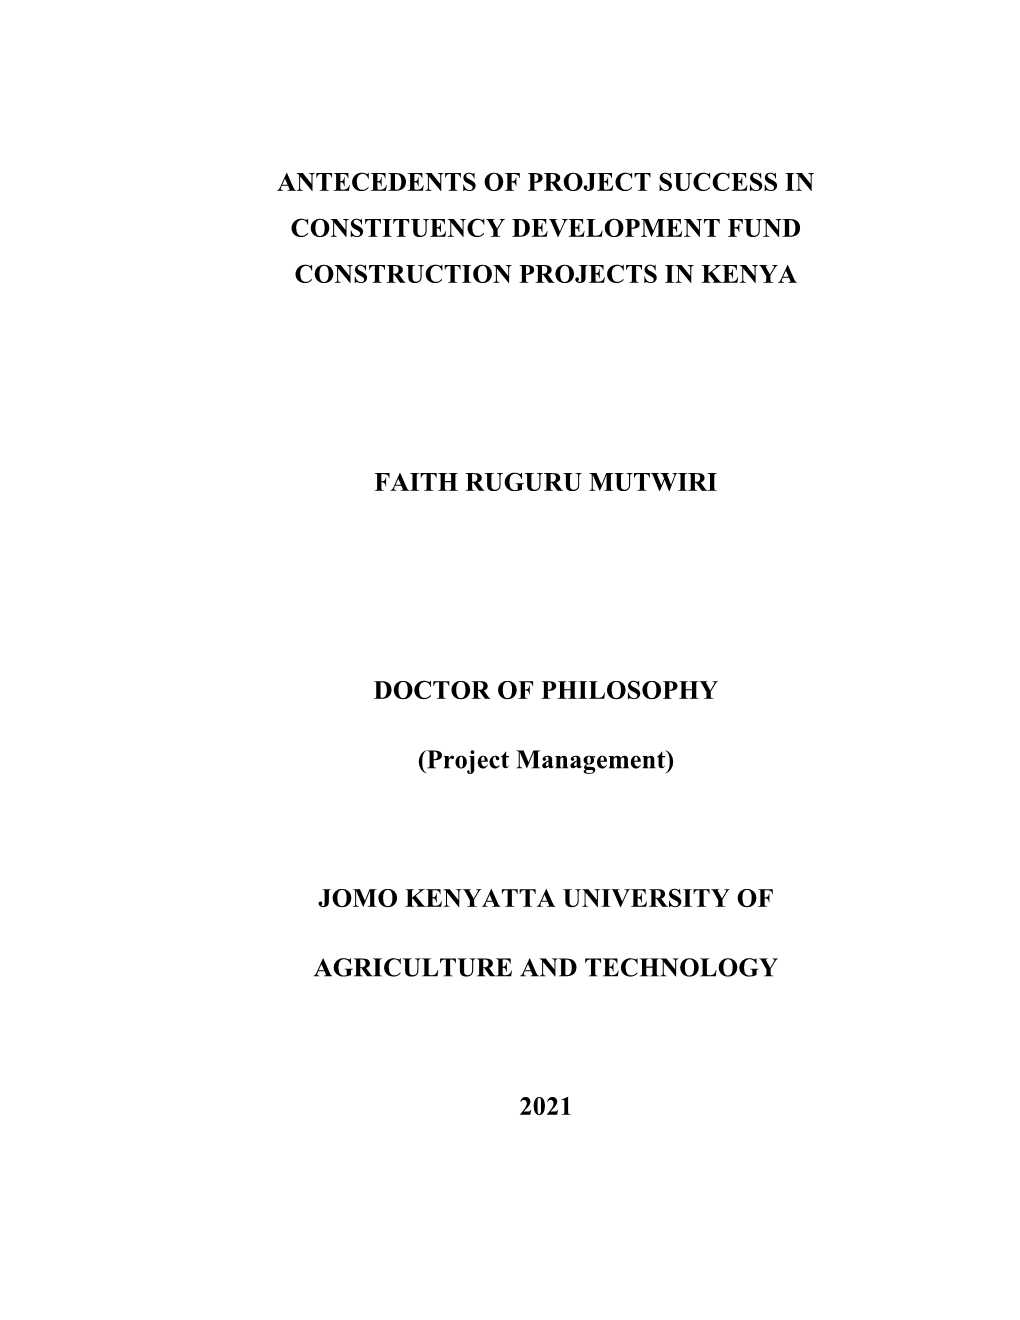 Antecedents of Project Success in Constituency Development Fund Construction Projects in Kenya